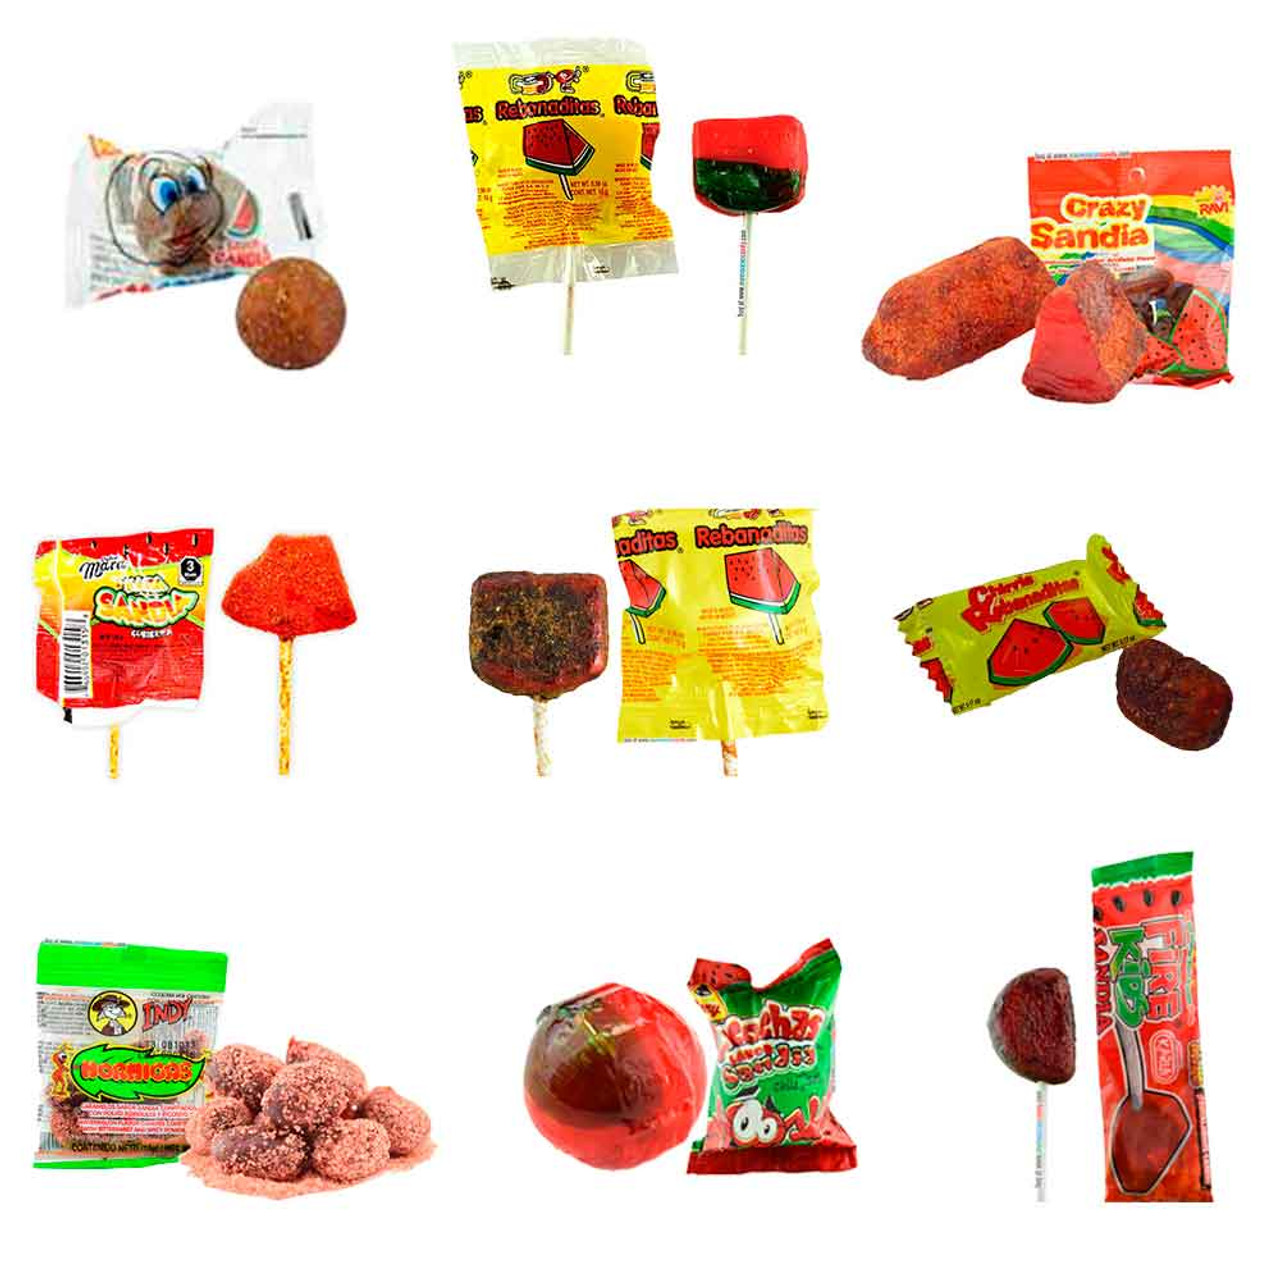 Most popular and delicious Watermelon flavored candies. This box has a great variety of watermelon candies such as Pulparindo's, Lollipops, Pica Gomas and many more. 